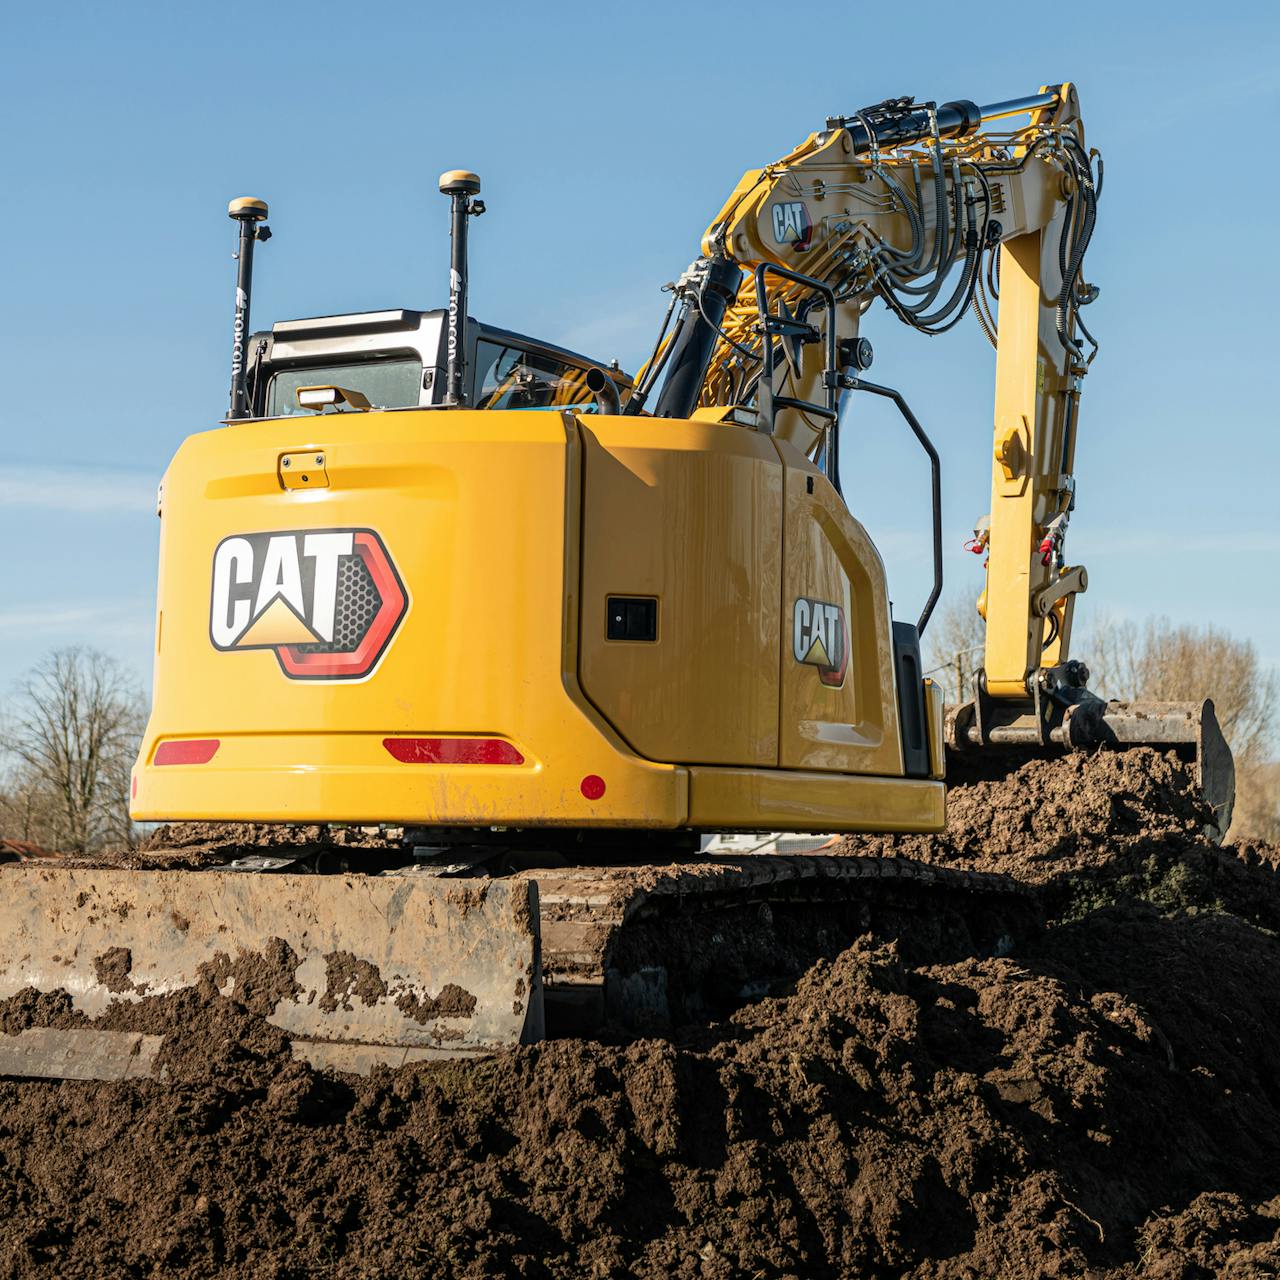 Cat excavator digging a trench